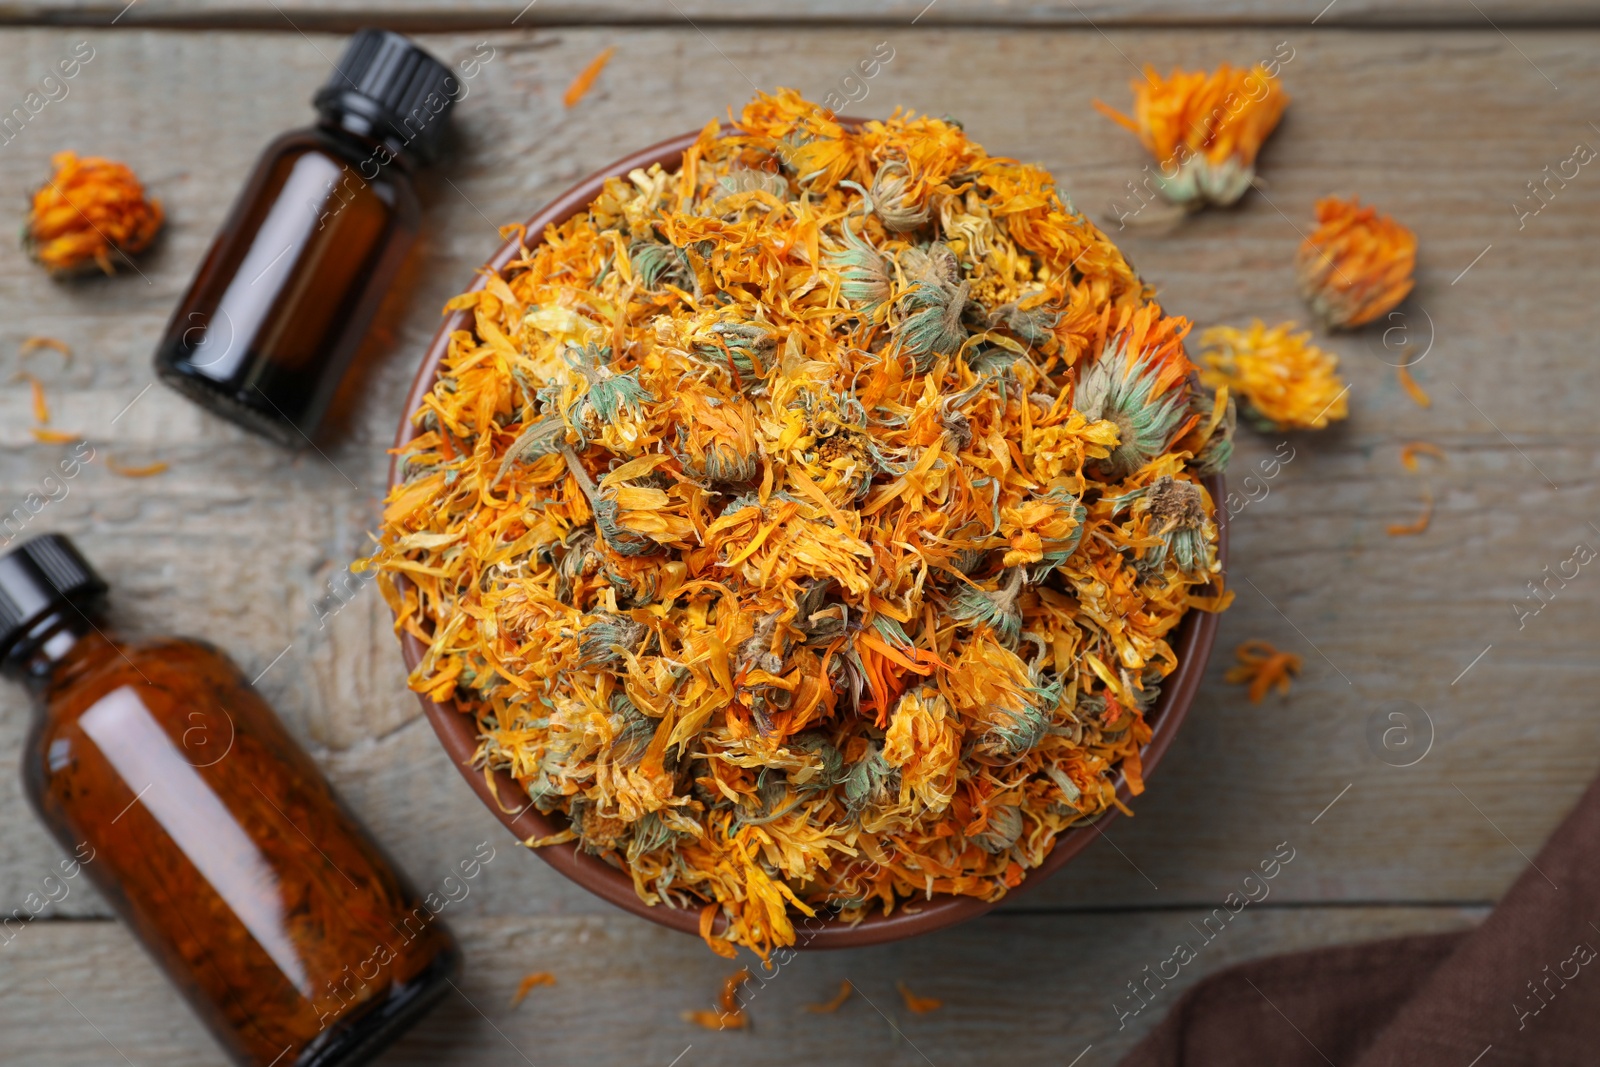 Photo of Dry calendula flowers and bottles with tincture on wooden table, flat lay